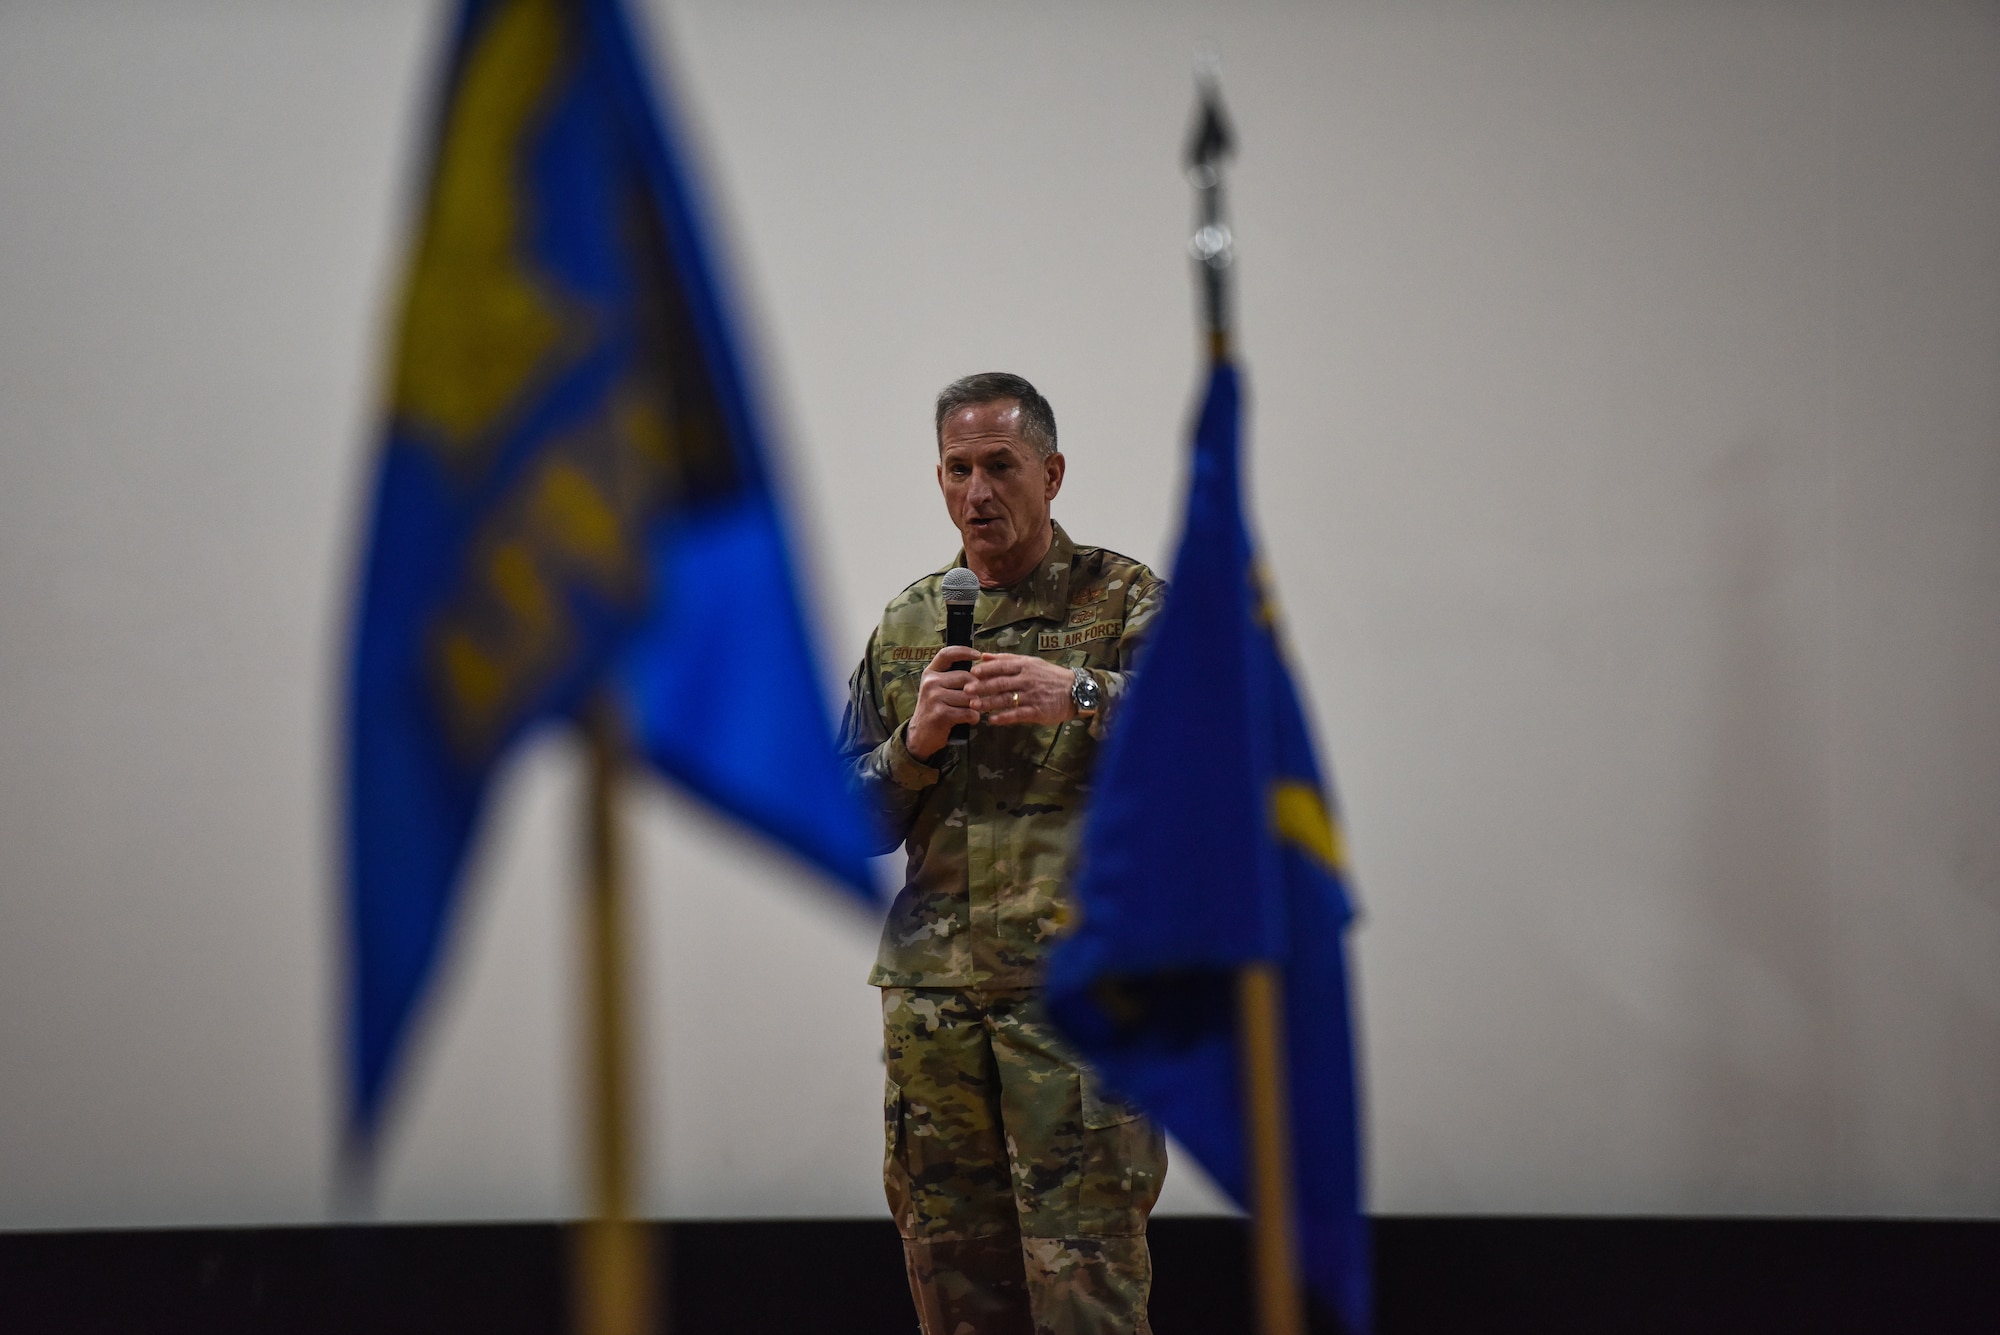 Air Force Chief of Staff Gen. David L. Goldfein answers questions from Airmen during an “all call” at Al Udeid Air Base, Qatar, Dec. 19, 2018. During the visit, Goldfein and Chief Master Sgt. of the Air Force Kaleth O. Wright thanked deployed Airmen for their contributions to the fight, especially during the holiday season. (U.S. Air Force photo by Senior Airman Travis Beihl)